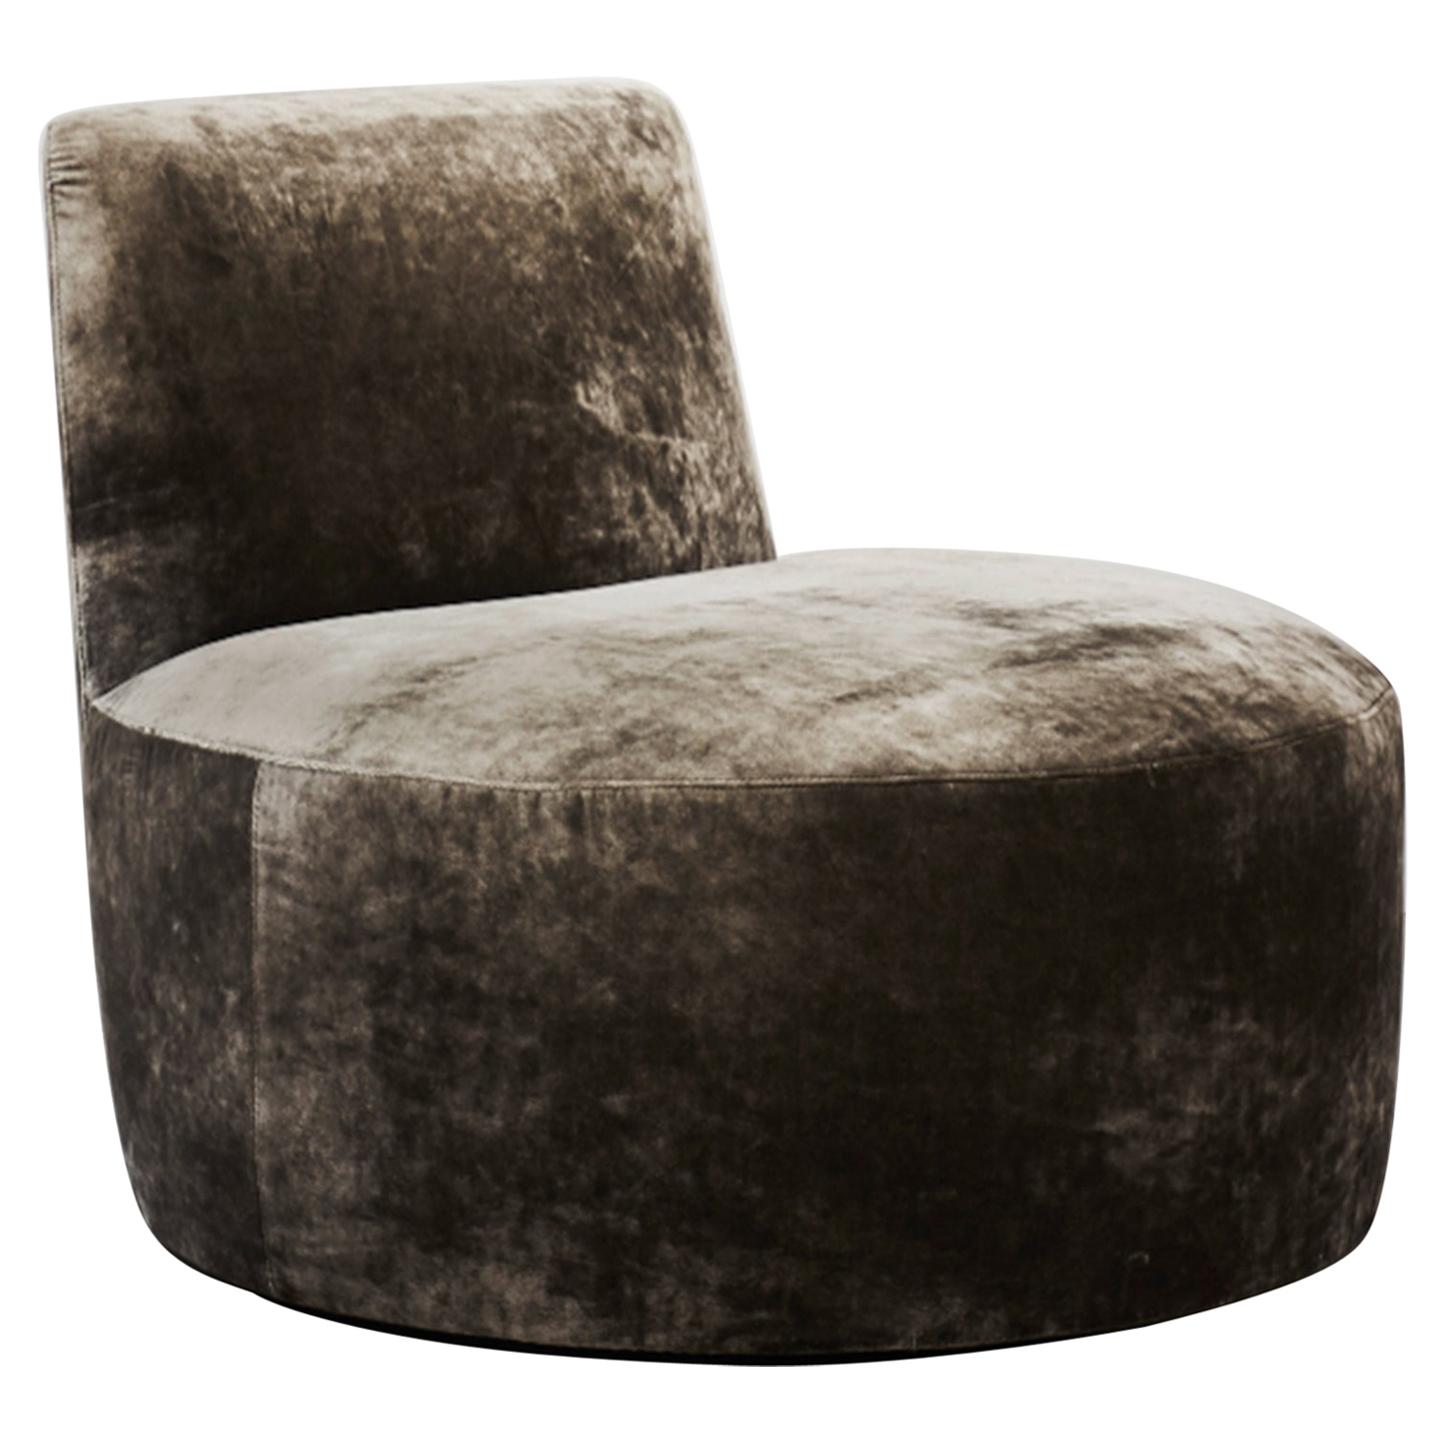 Tacchini Baobab Chair Designed by Lievore Altherr Molina